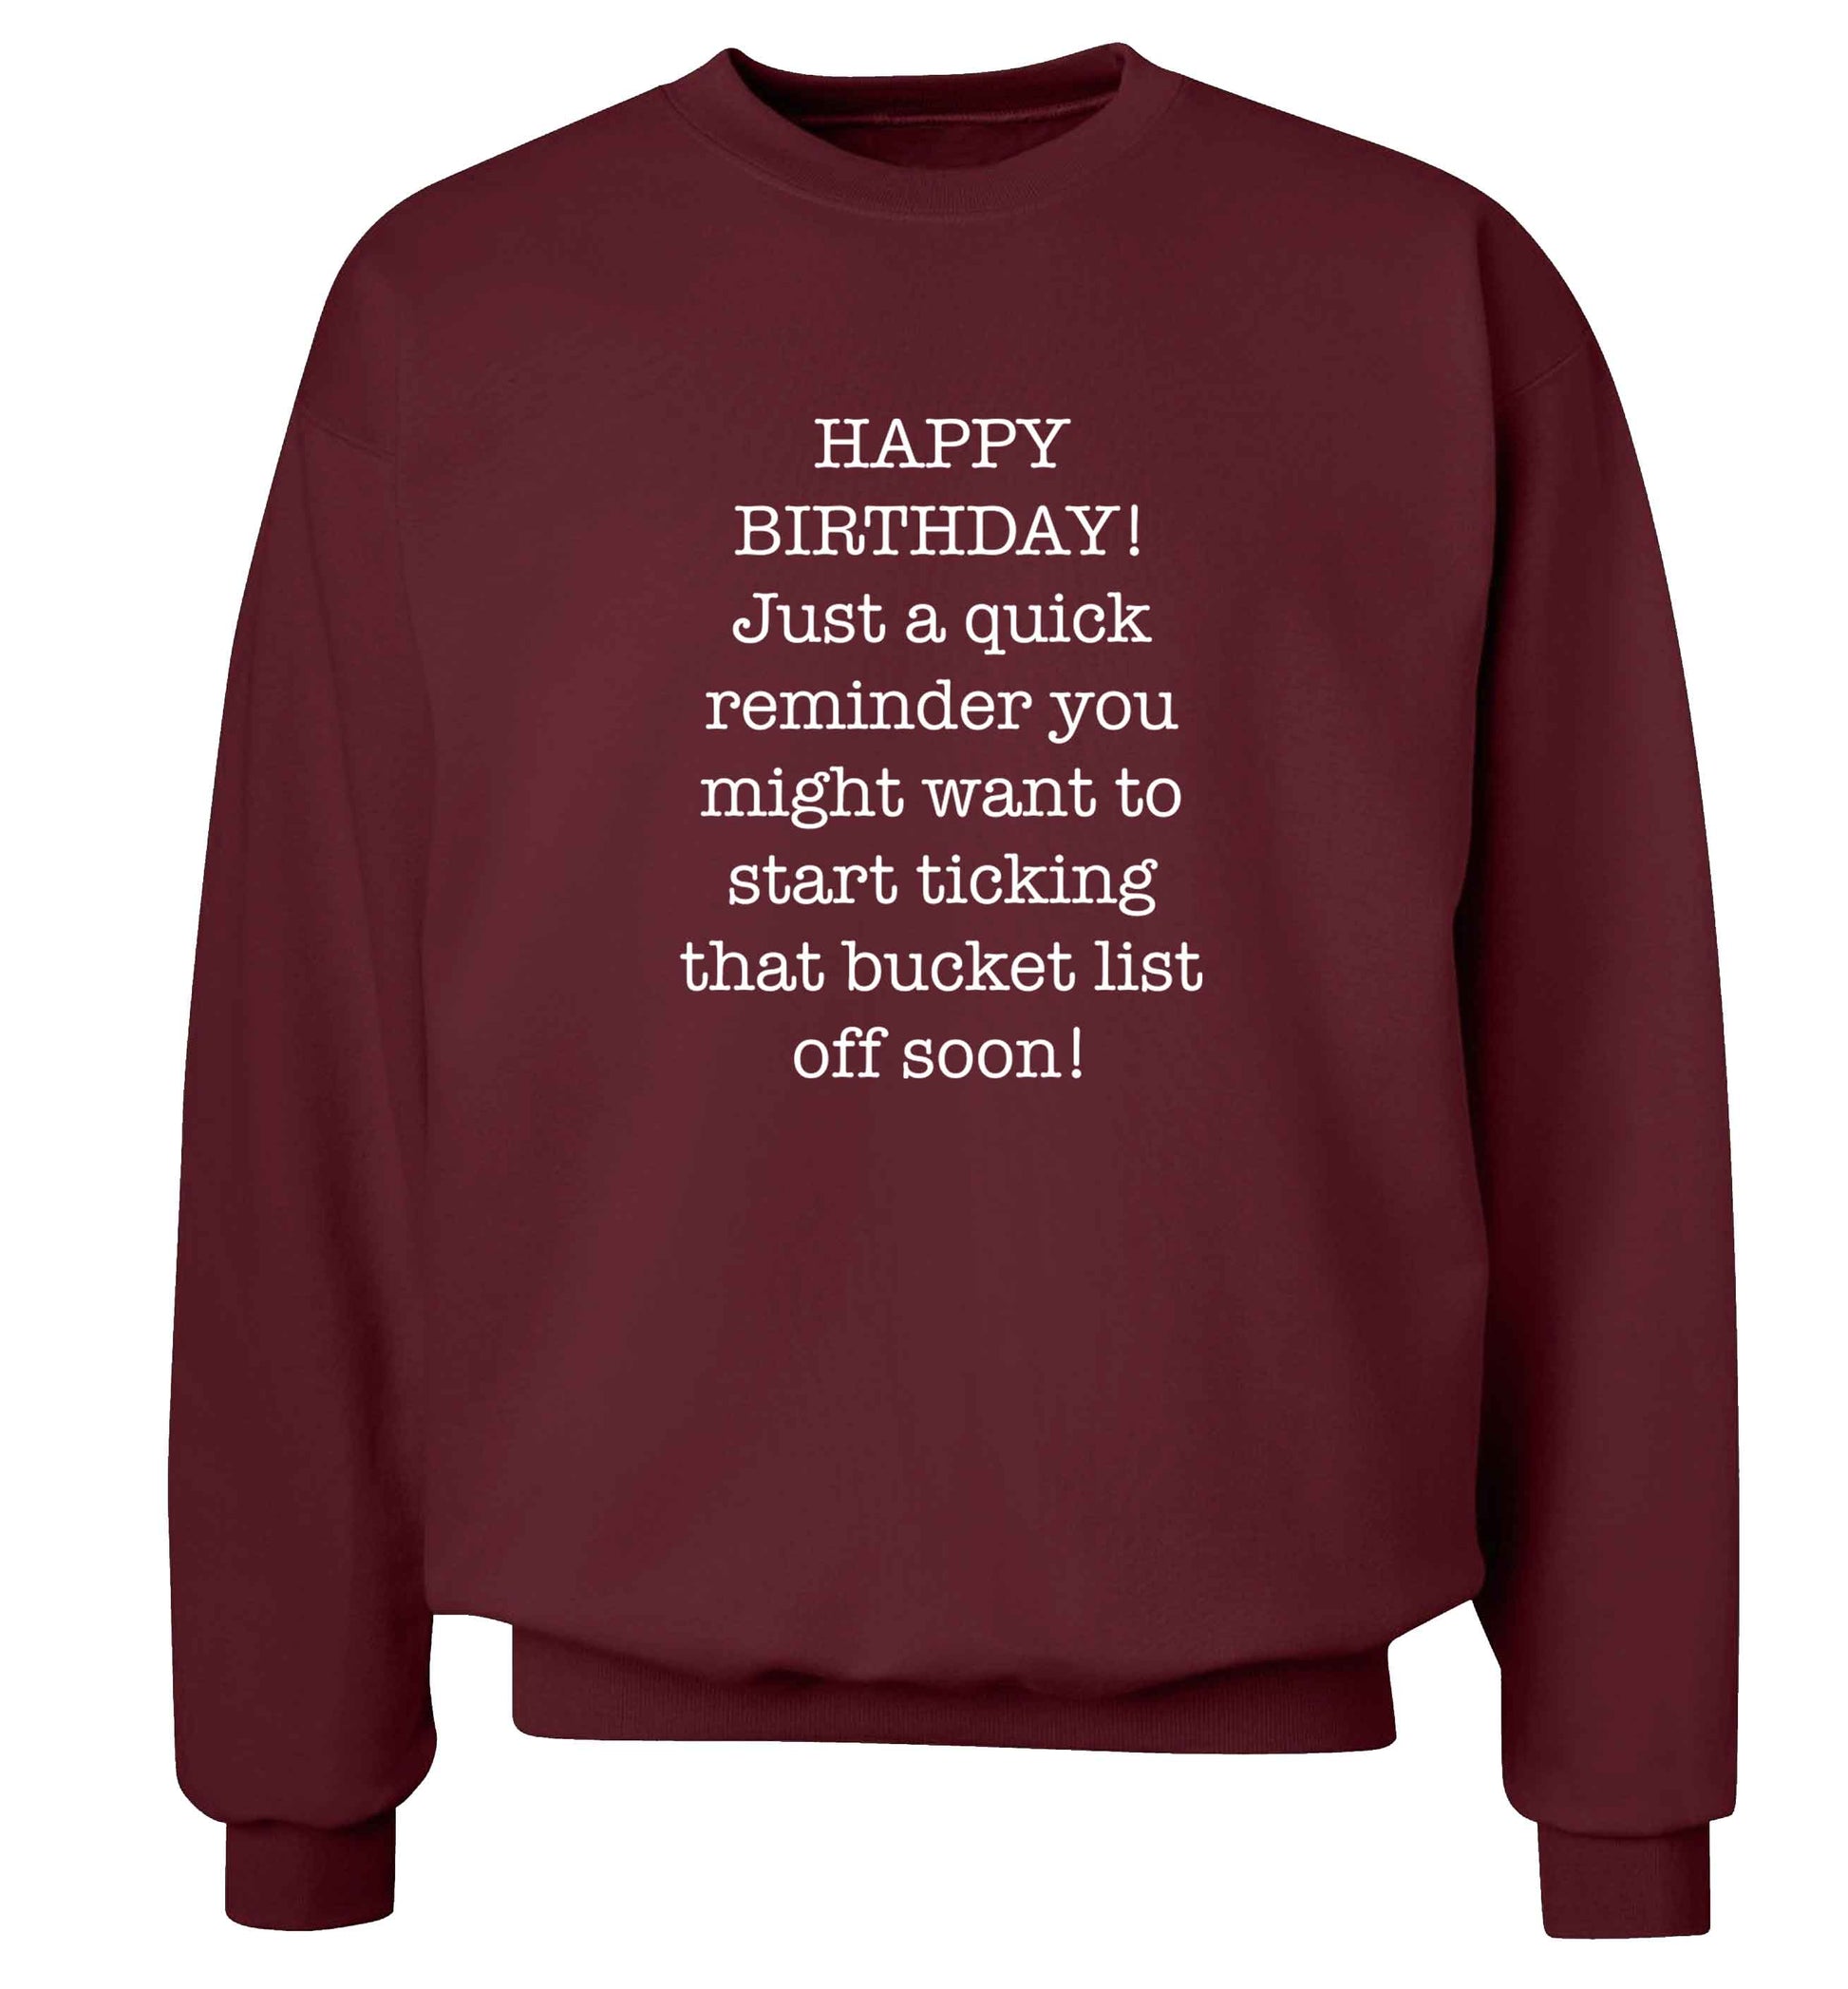 Happy birthday, just a quick reminder you might want to start ticking that bucket list off soon adult's unisex maroon sweater 2XL